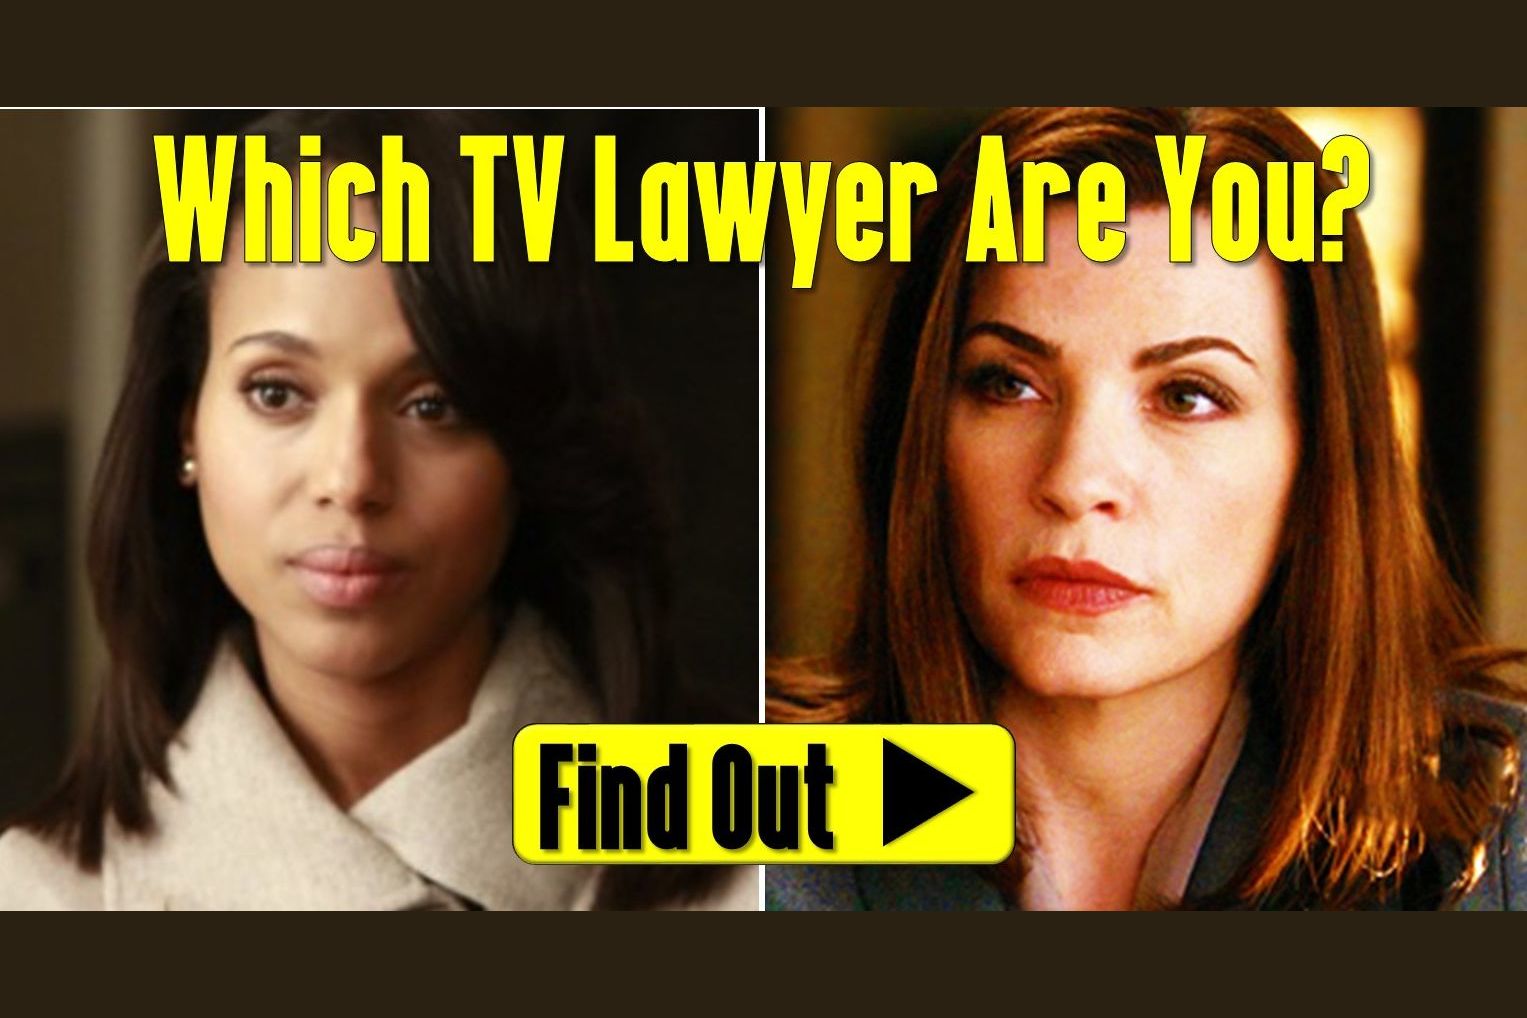 Which TV Lawyer Are You?